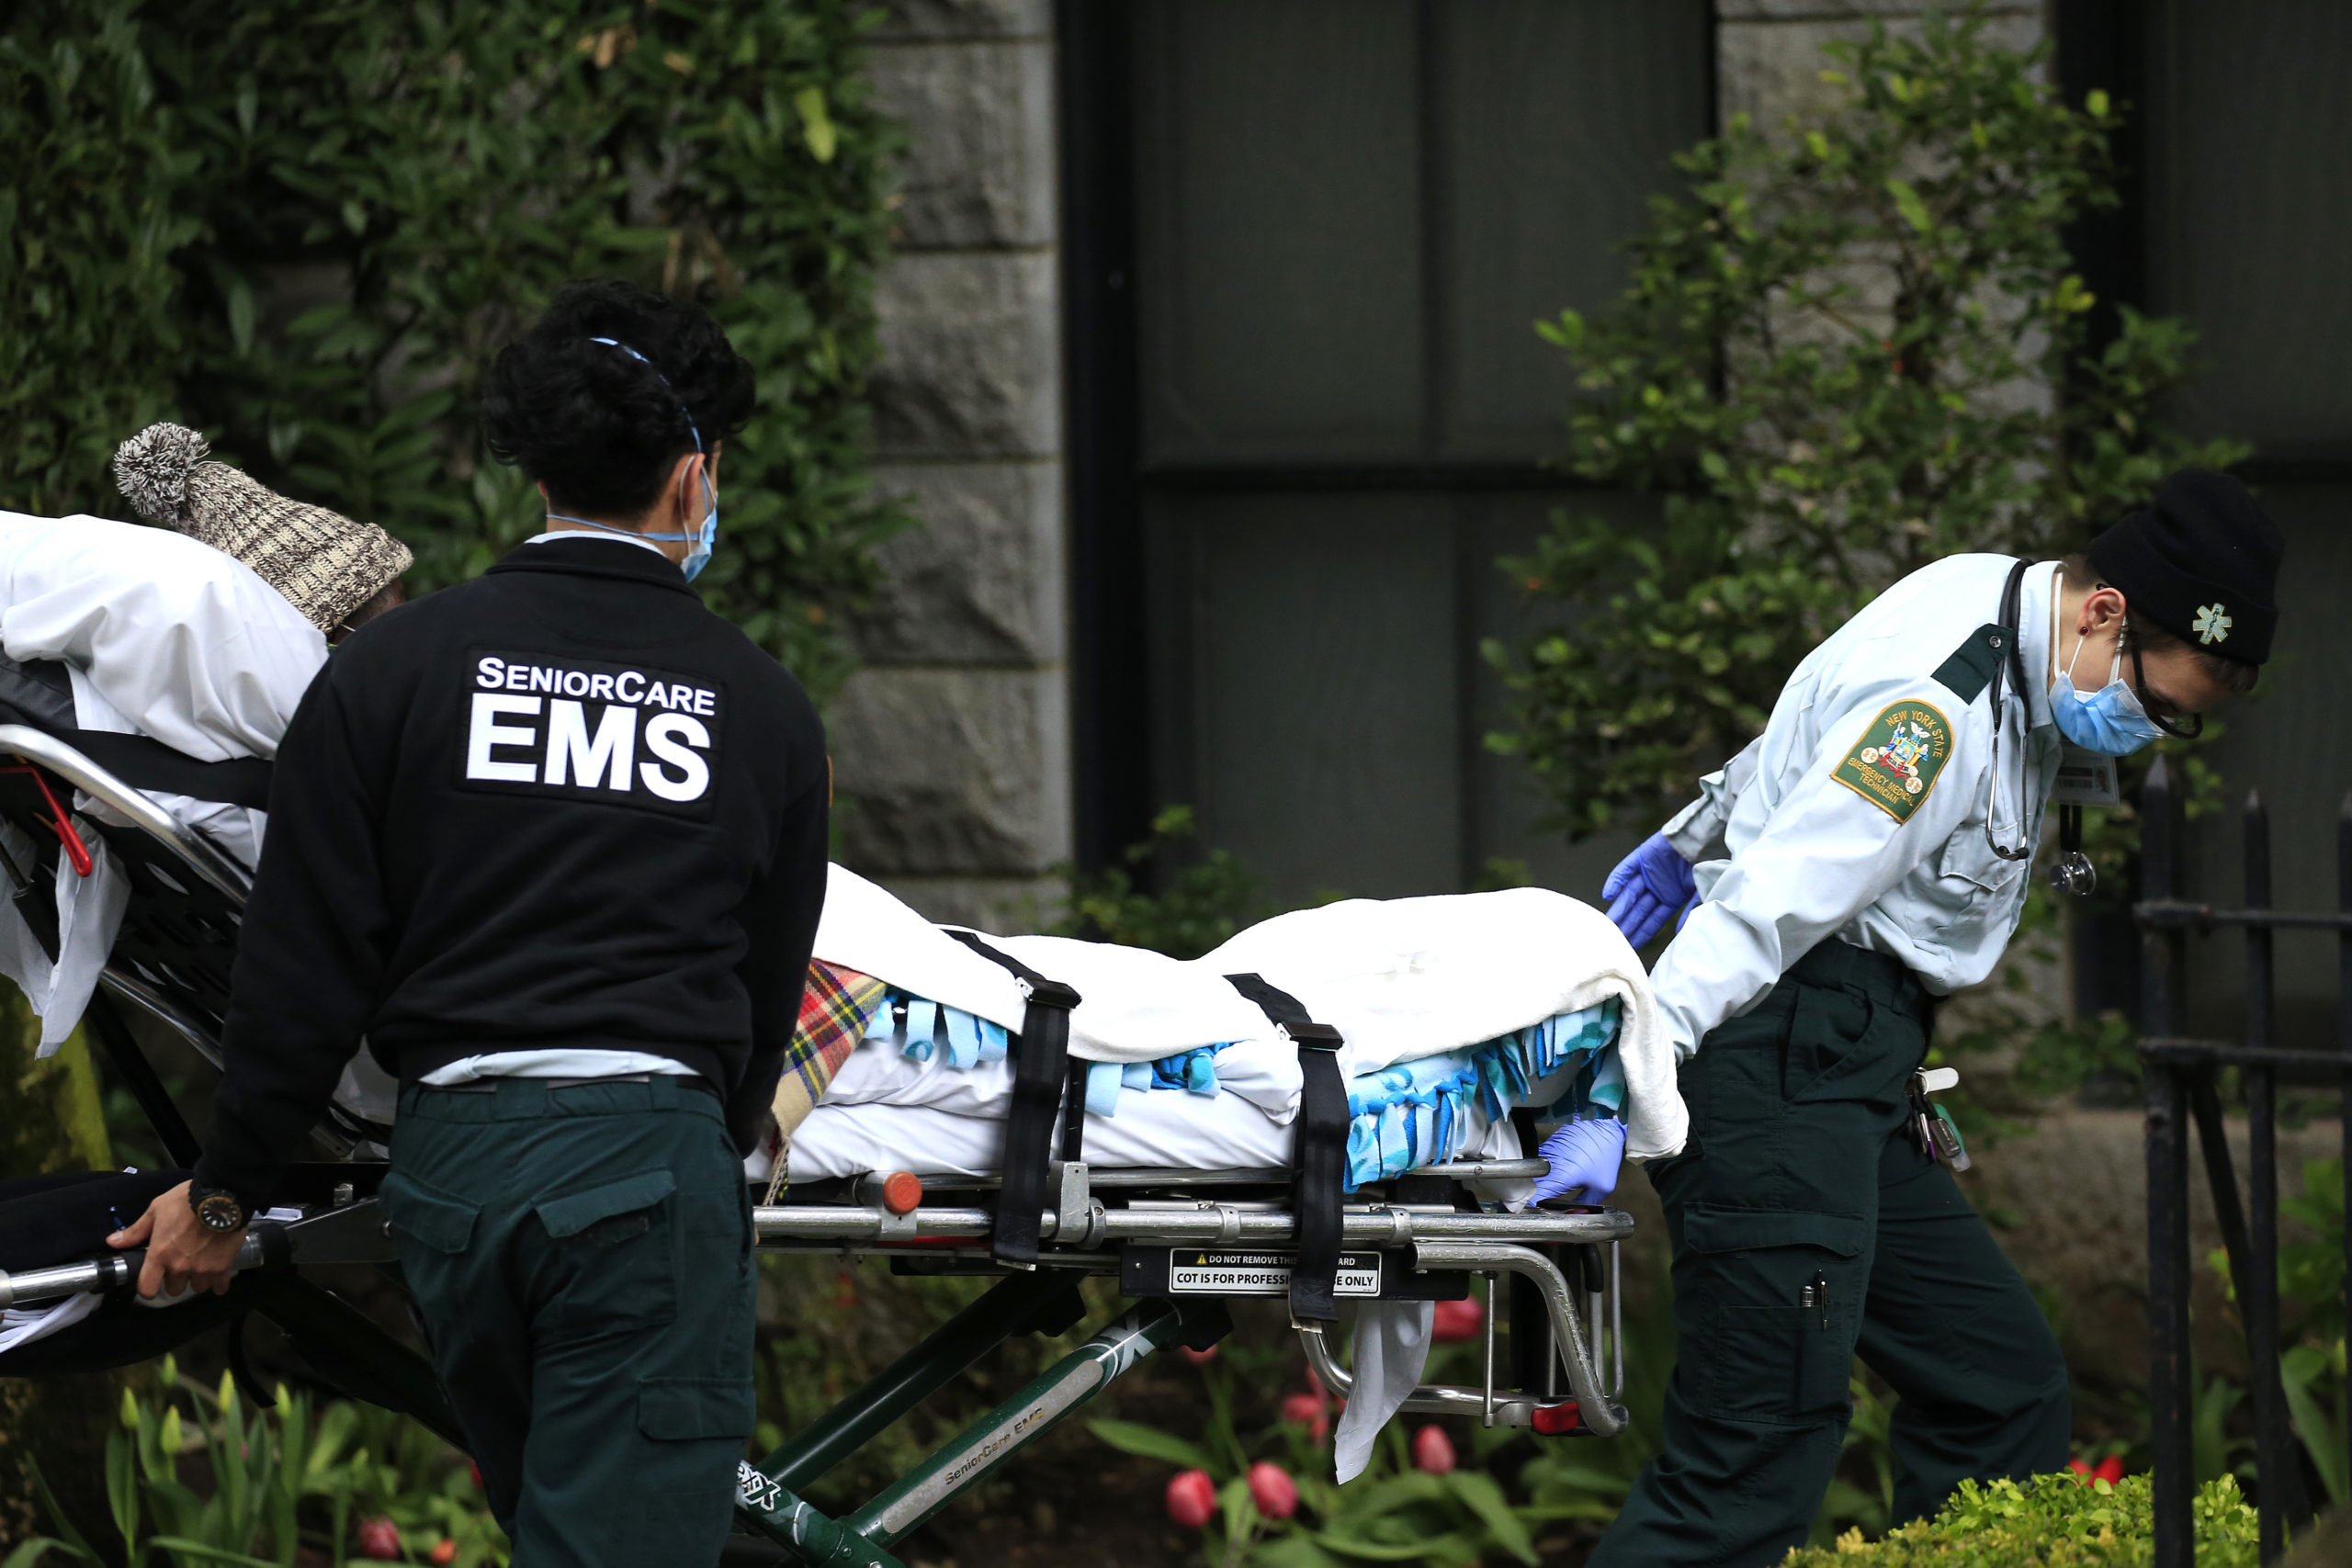 Emergency Medical Service workers unload a patient out of their ambulance at the Cobble Hill Health Center on April 18, 2020 in the Brooklyn borough of New York City. The nursing home recorded dozens of COVID-19 reported deaths. (Justin Heiman/Getty Images)